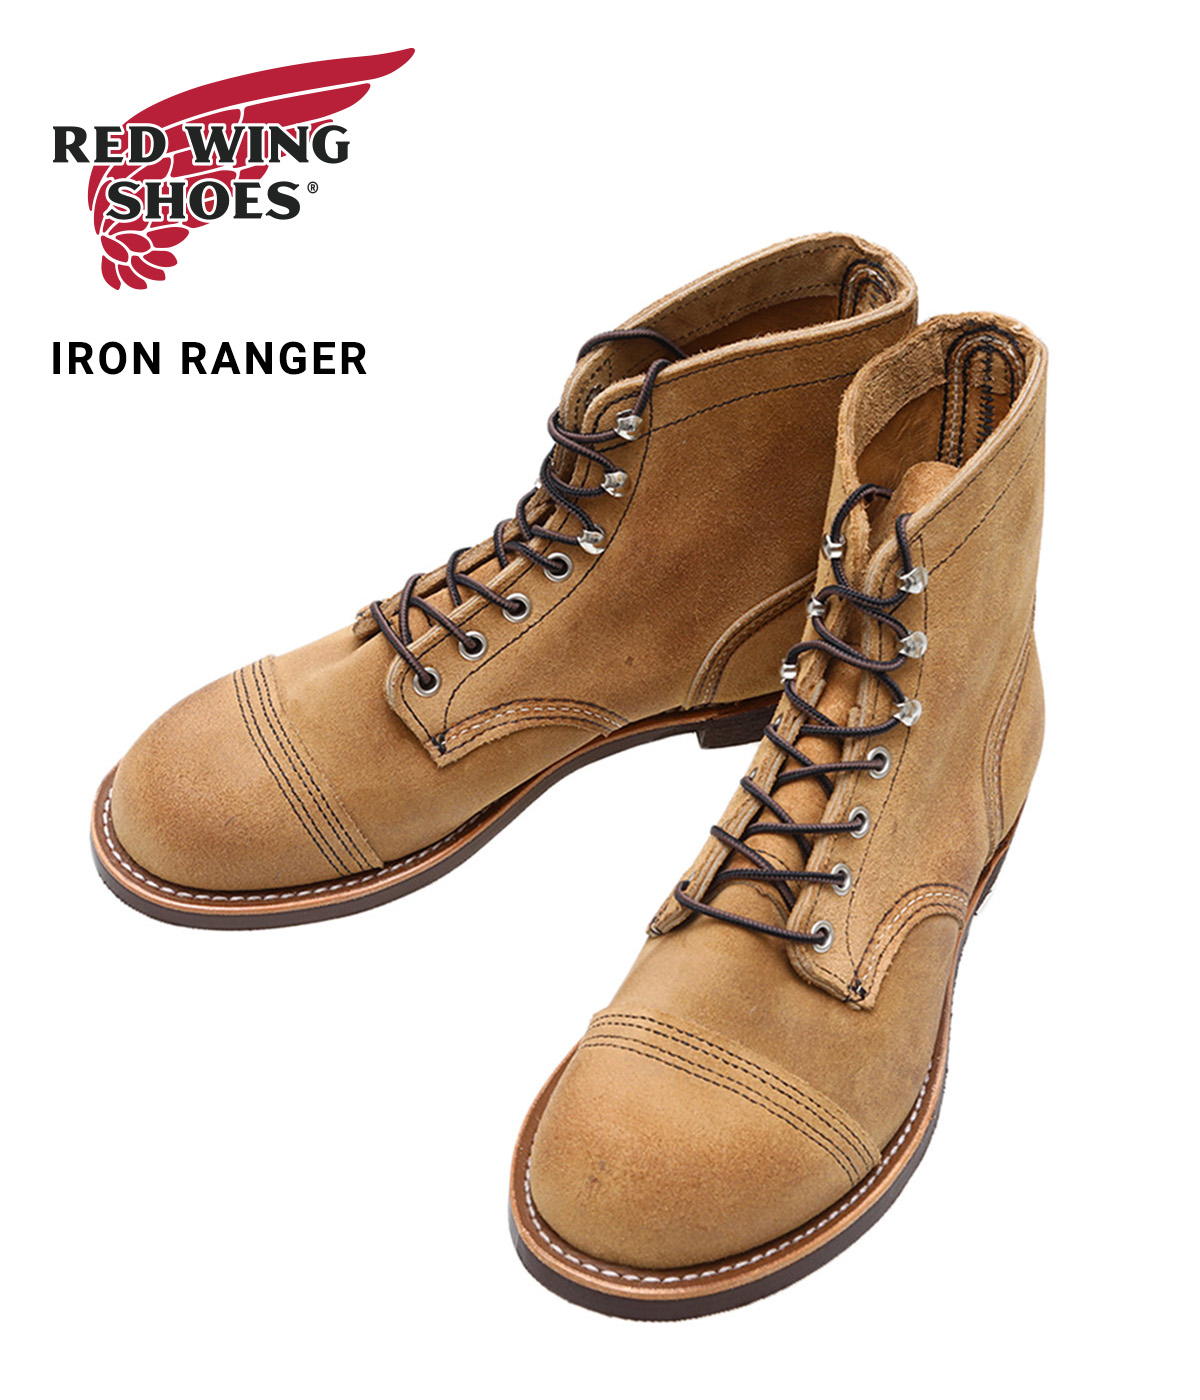 RED WING / レッドウィング ： IRON RANGER ： 8083 : 8083 : ARKnets 